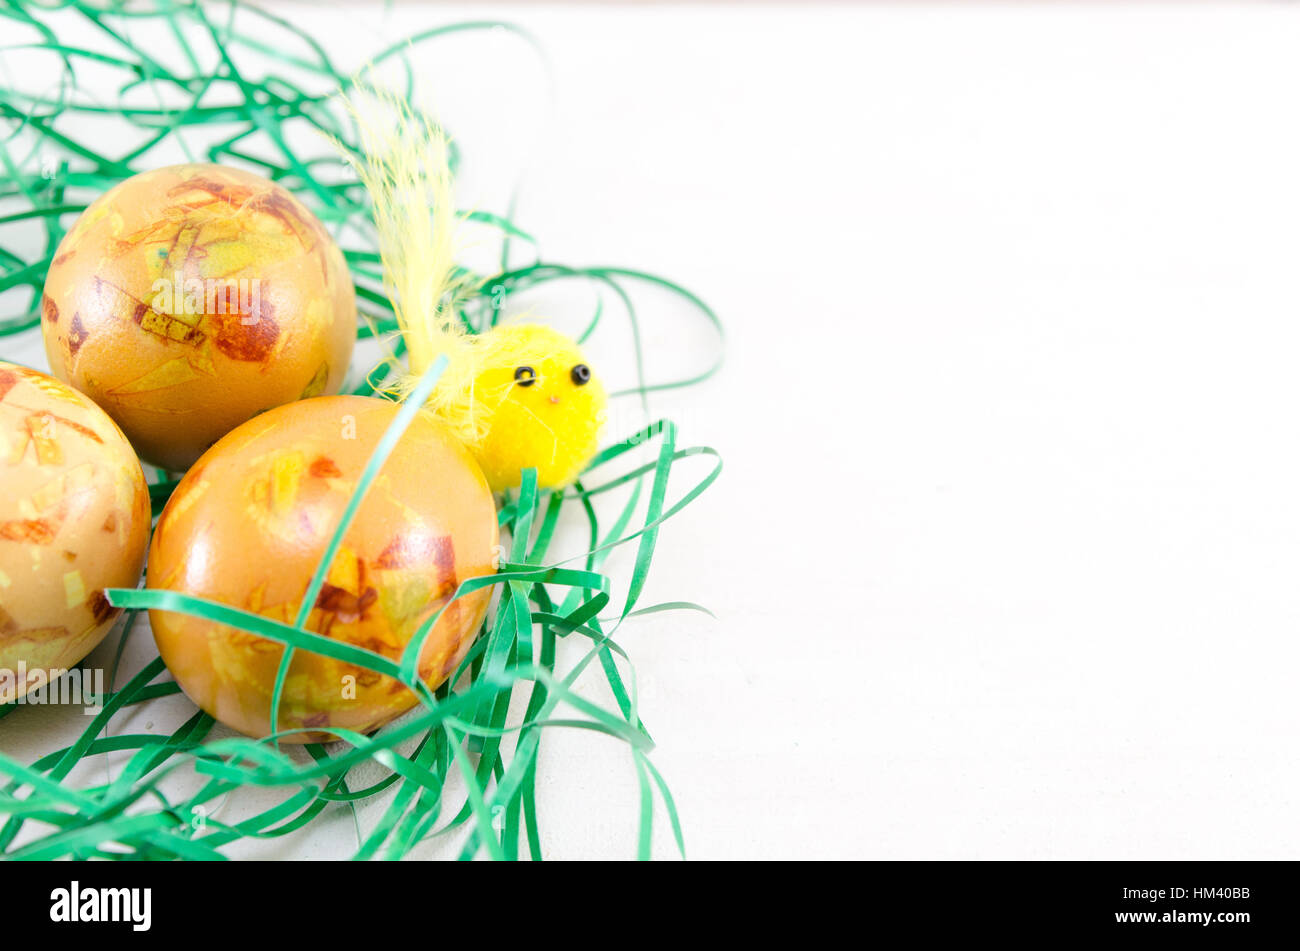 Decorated Easter eggs in green straw on a table Stock Photo